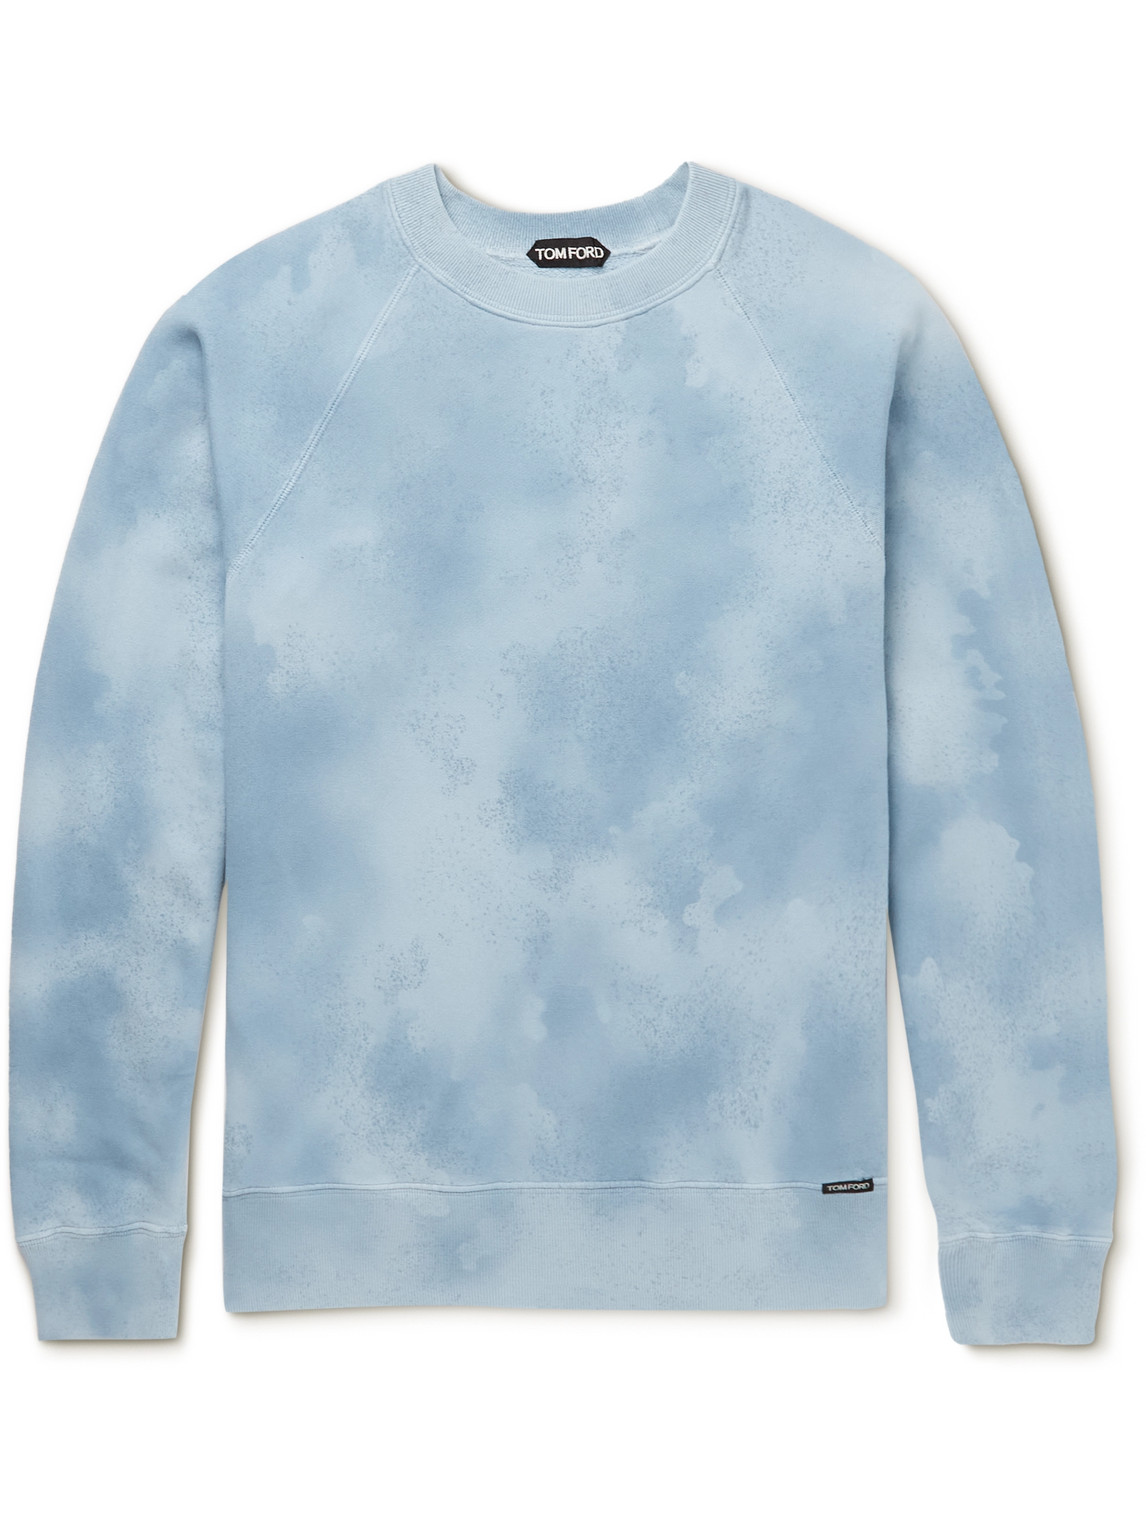 TOM FORD TIE-DYED COTTON-JERSEY SWEATSHIRT